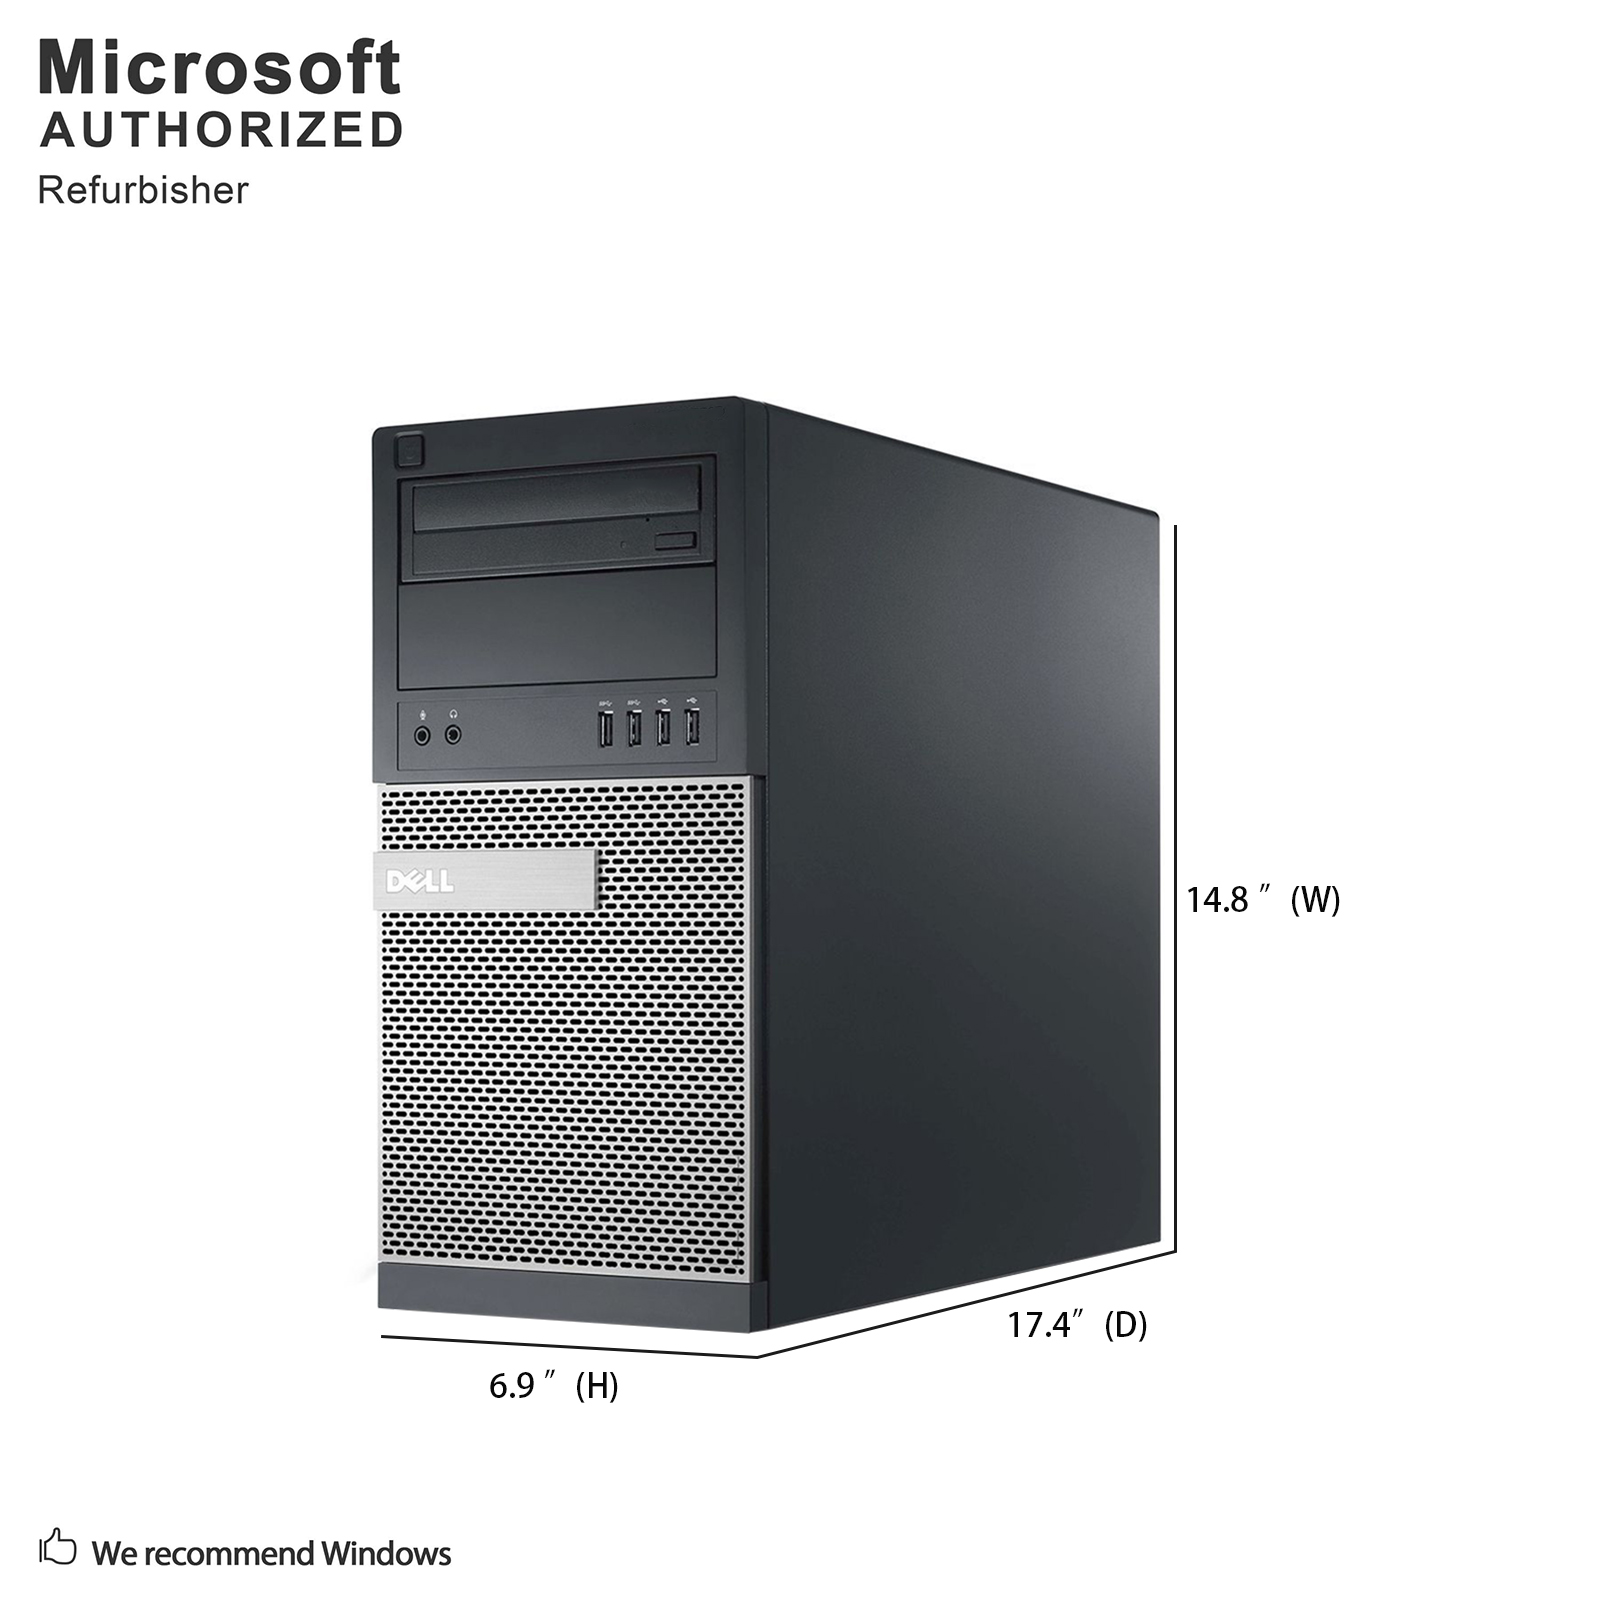 Used Grade A Dell OptiPlex 7010 Tower, Intel Quad Core I7-3770 up to 3.9G, 8G DDR3, 256G SSD, WiFi, BT 4.0, DVD, USB 3.0, VGA, DP, W10P64-Multi Languages Support (EN/ES/FR), 1 year warranty - image 3 of 7